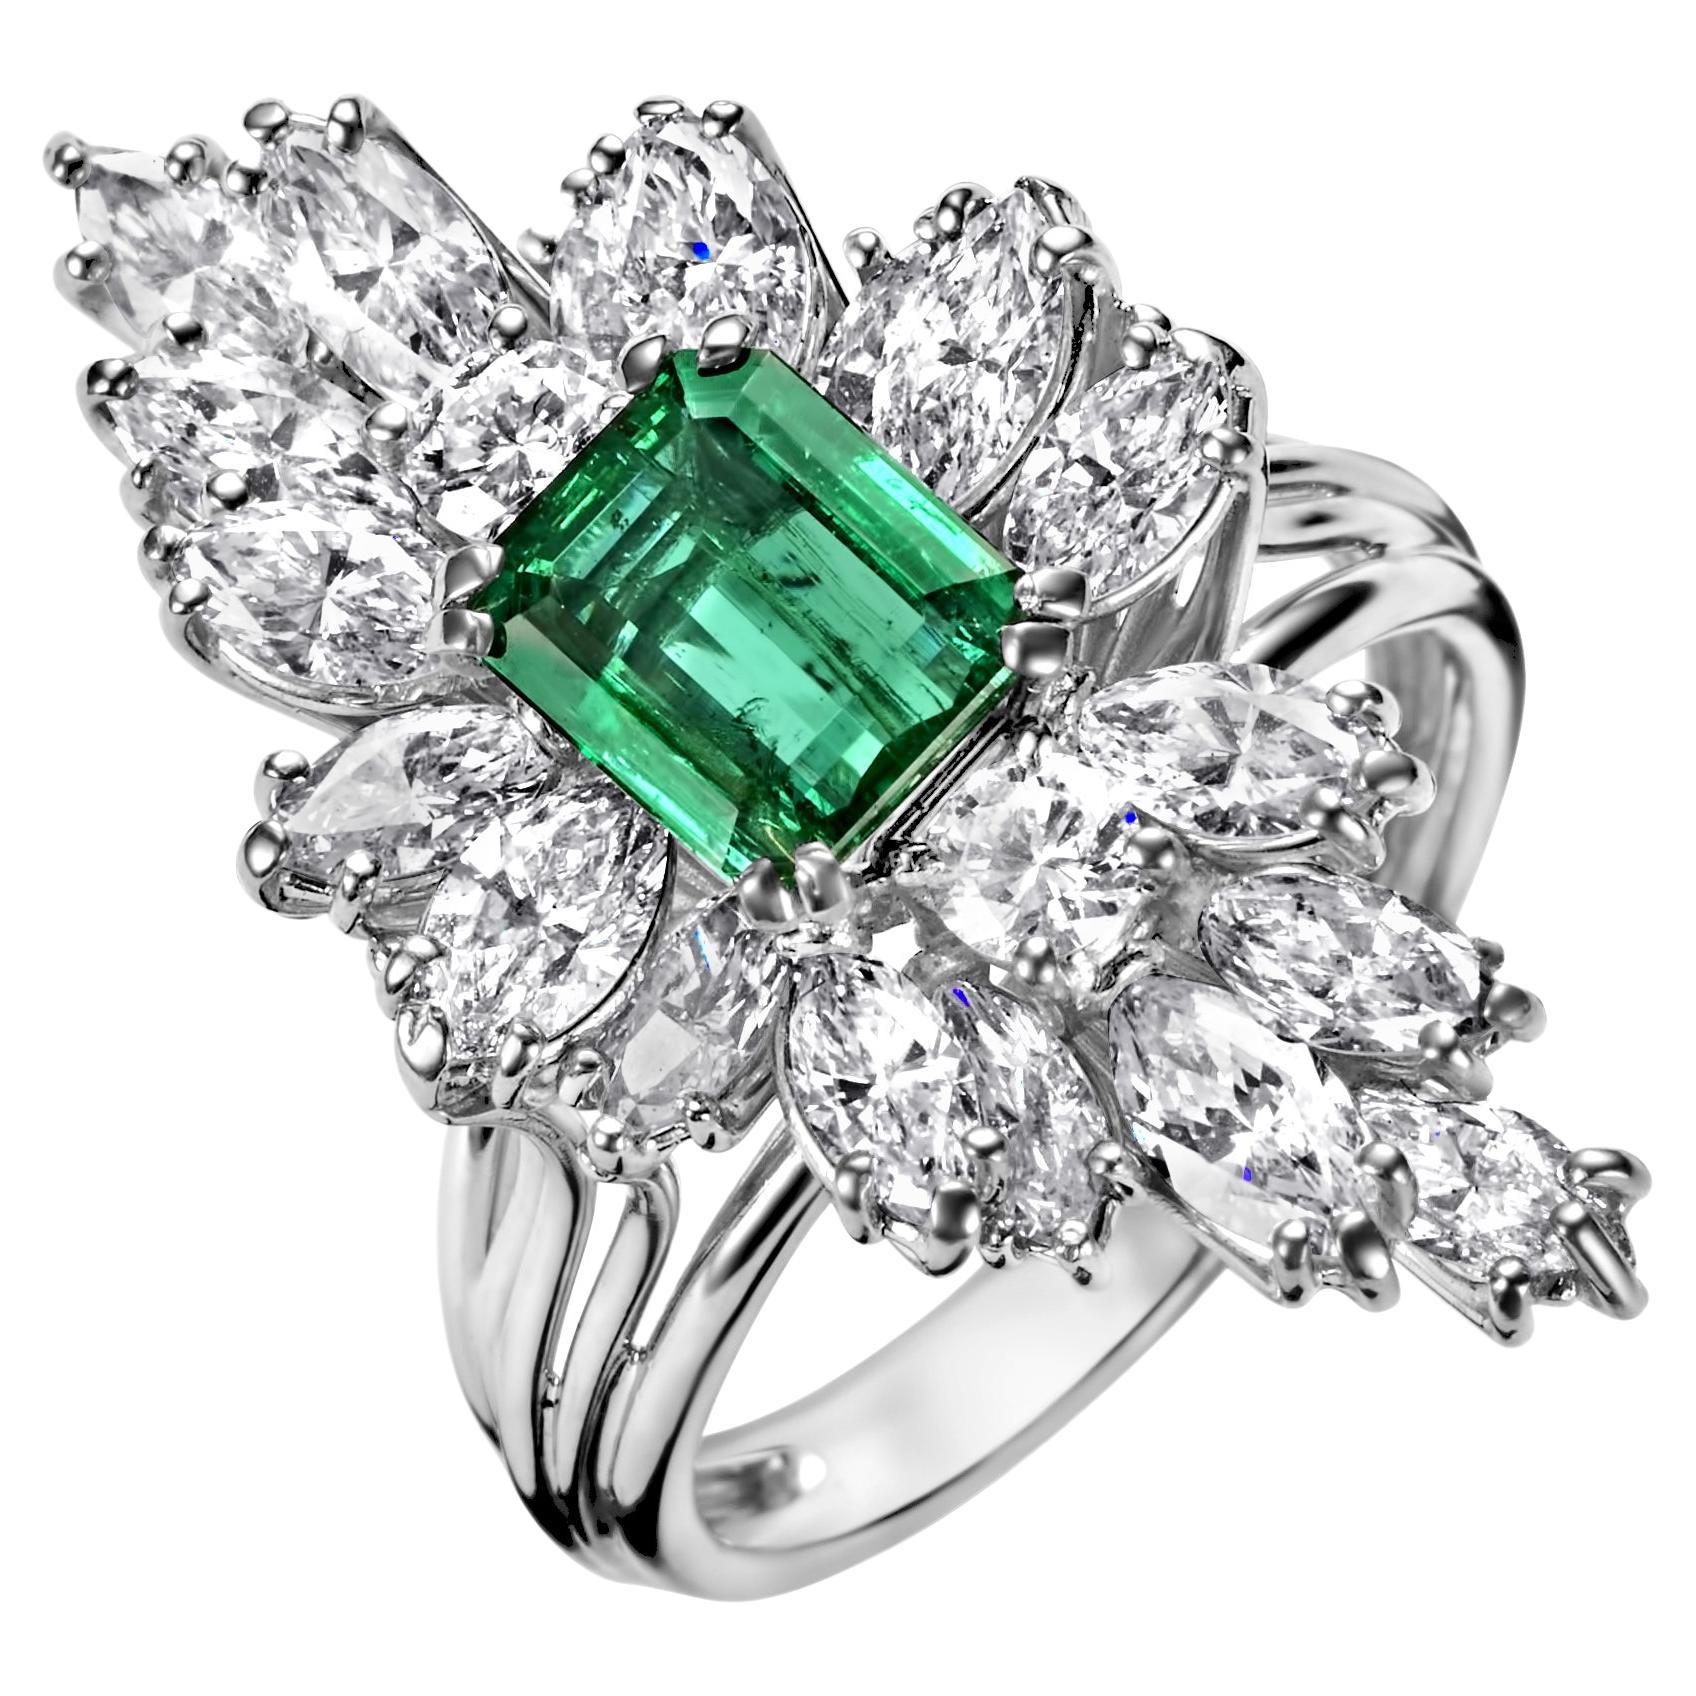 18kt White Gold Ring with 1.49 Ct Emerald Stone Surrounded by Diamonds For Sale